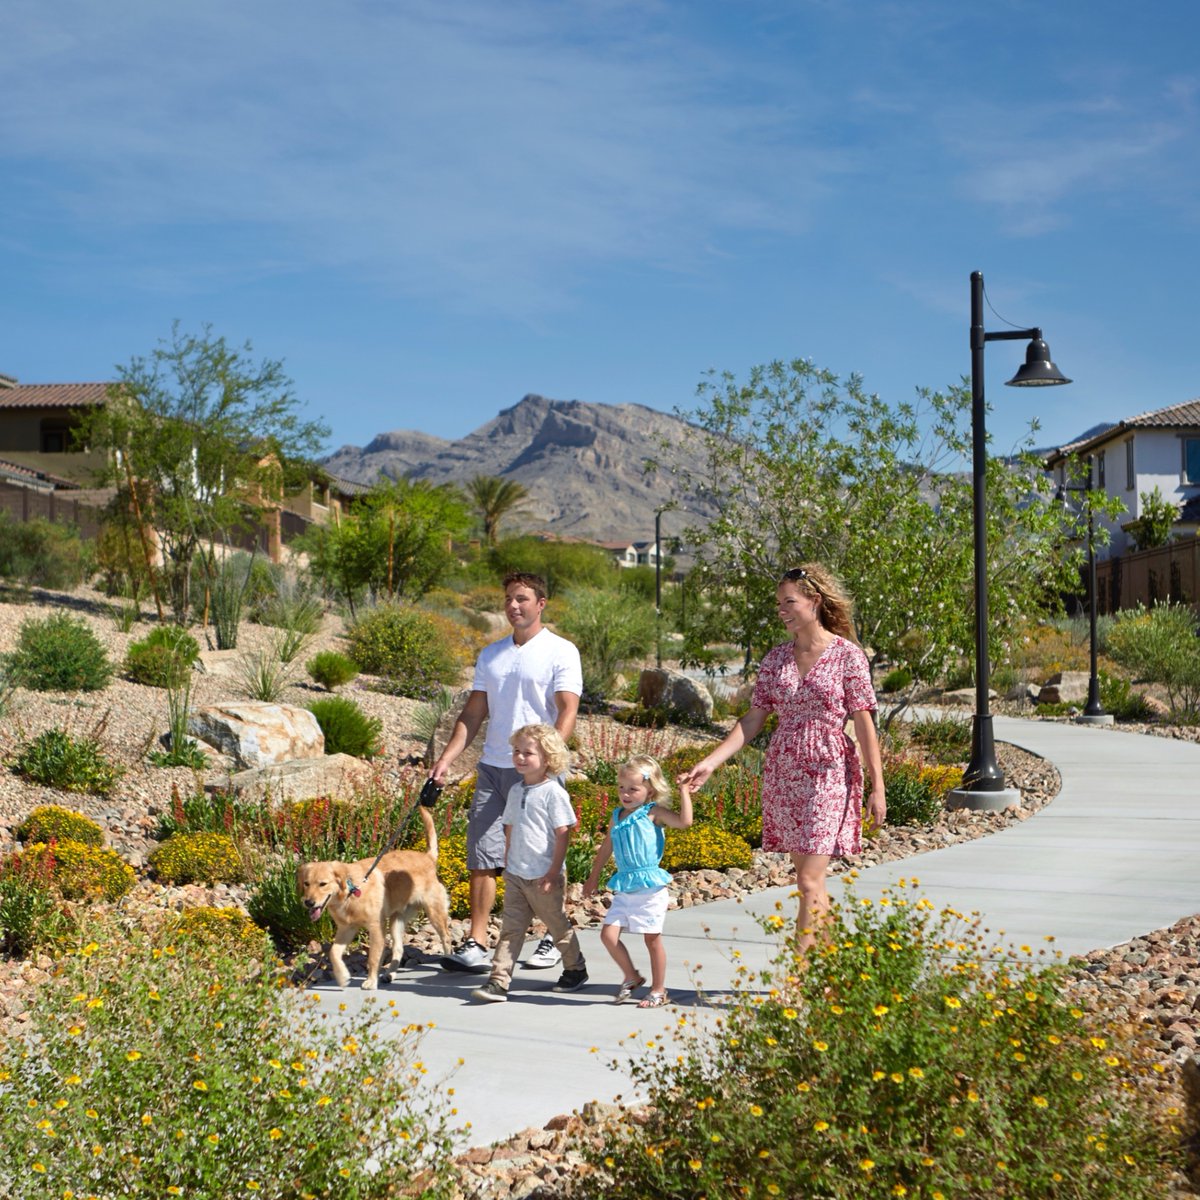 With over 200 miles of interconnected trails, our community makes it easy to walk, jog, or bike to schools, parks, and beyond. Embrace the outdoors, stay active, and enjoy the beauty of our surroundings as you explore Summerlin's vibrant neighborhoods.